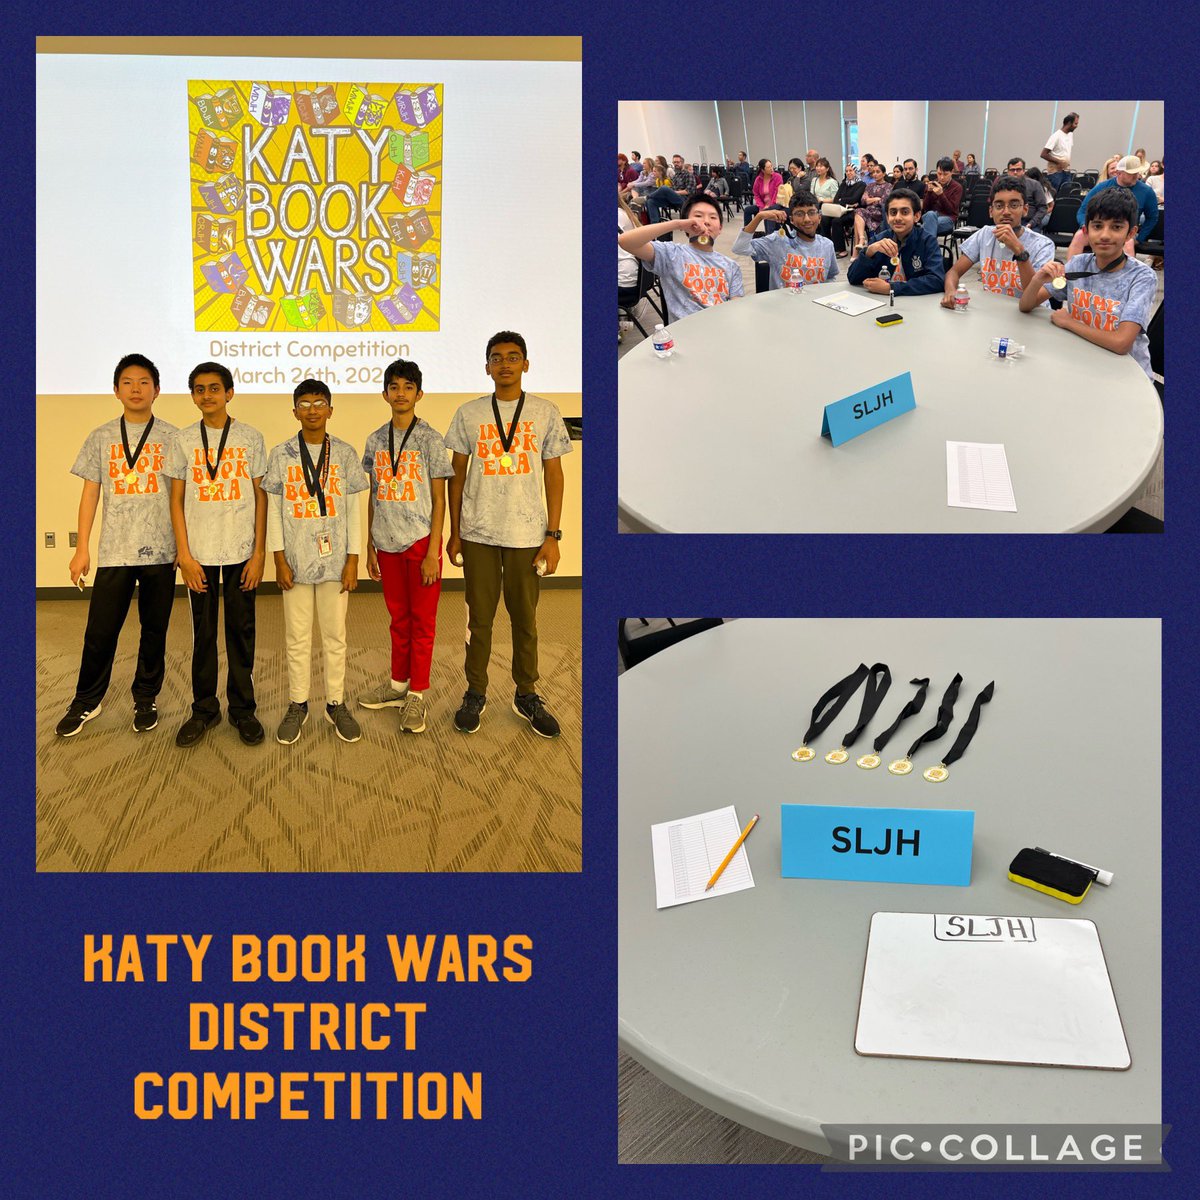 SUPER PROUD of our Scholars of Sparta! They competed at our Katy Book Wars district competition last night & made us PROUD! We didn’t get the results we wanted but we’ll be back next year! @spartan_speak @katy_libraries #7ljhpride